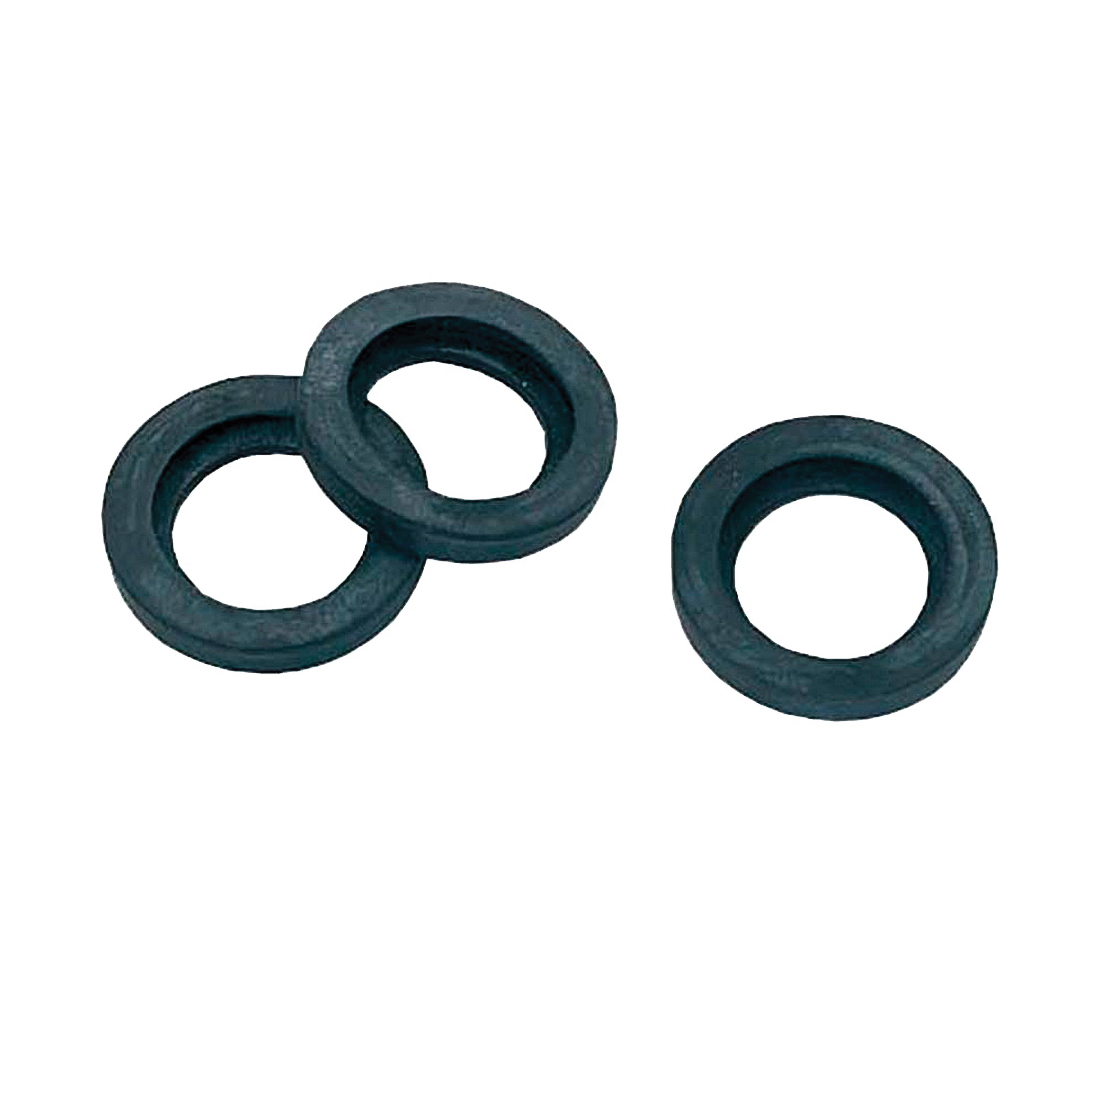 Gilmour Mfg 09QSR-BAG Heavy-Duty Quick-Connect Seal, Rubber - 1